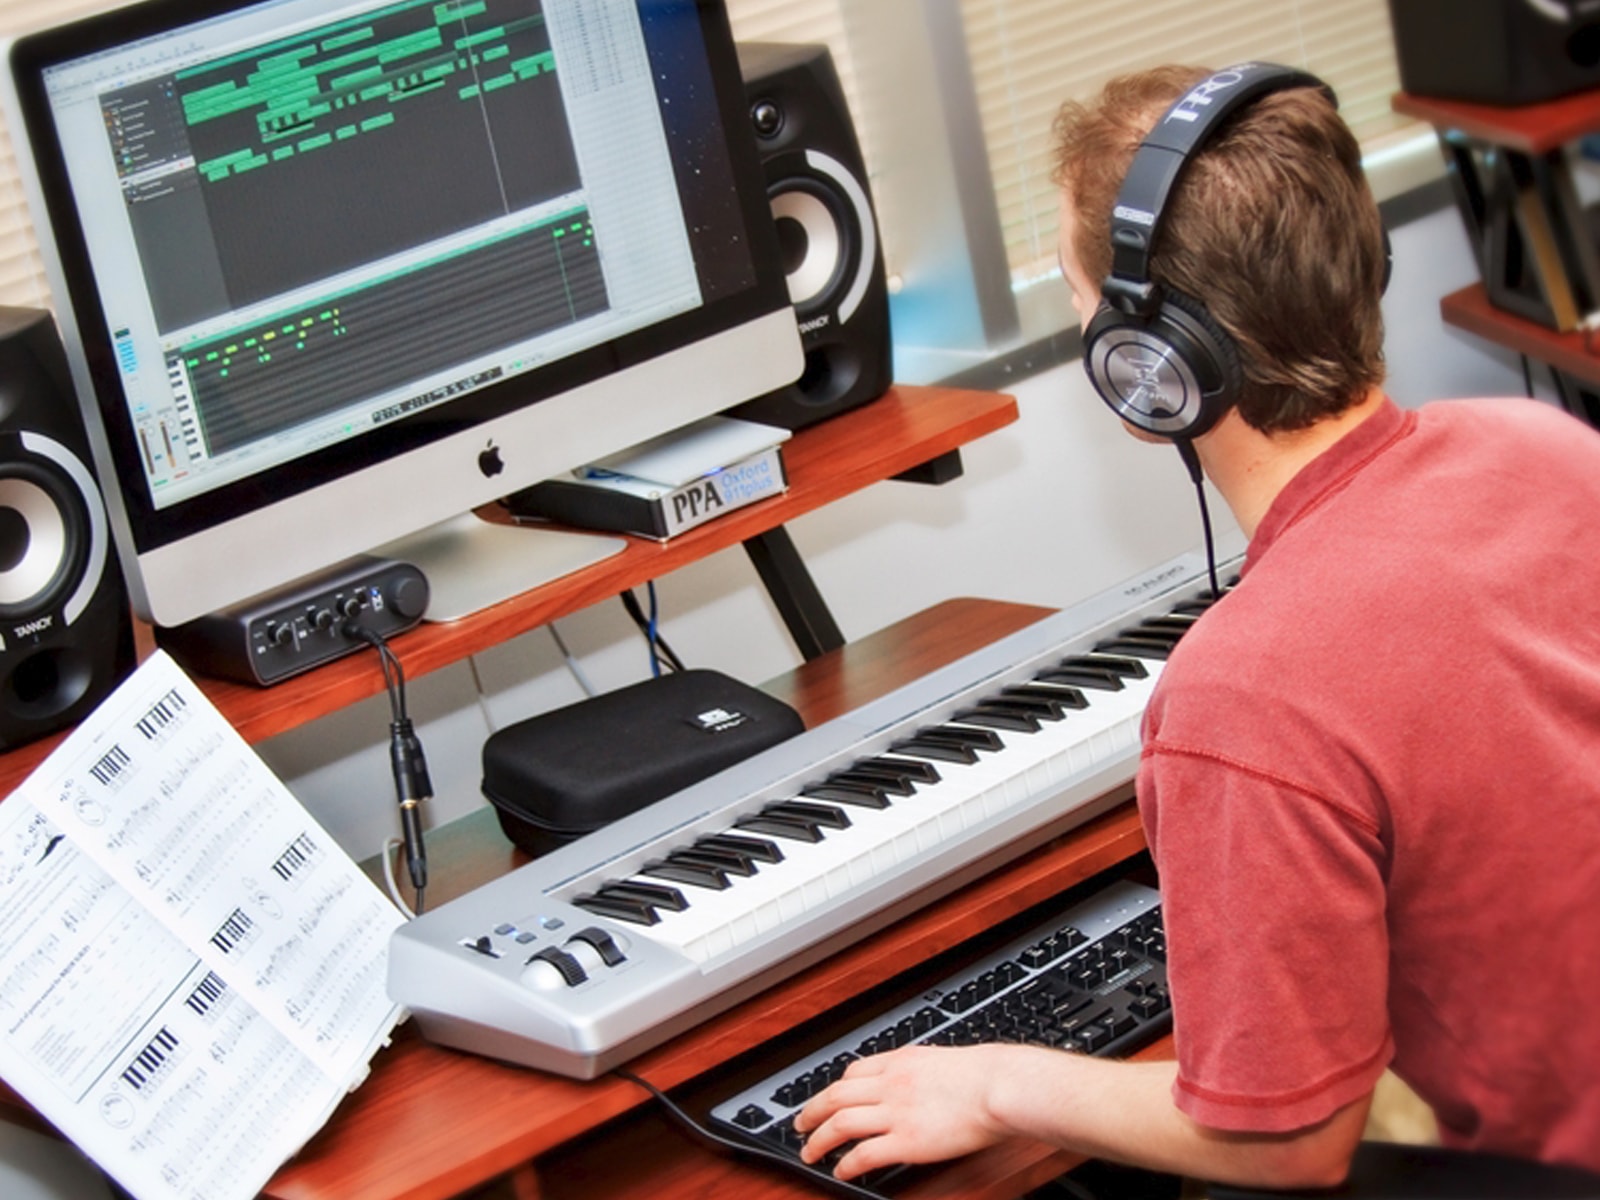 DigiPen sound design student composing music with a computer and a digital piano keyboard